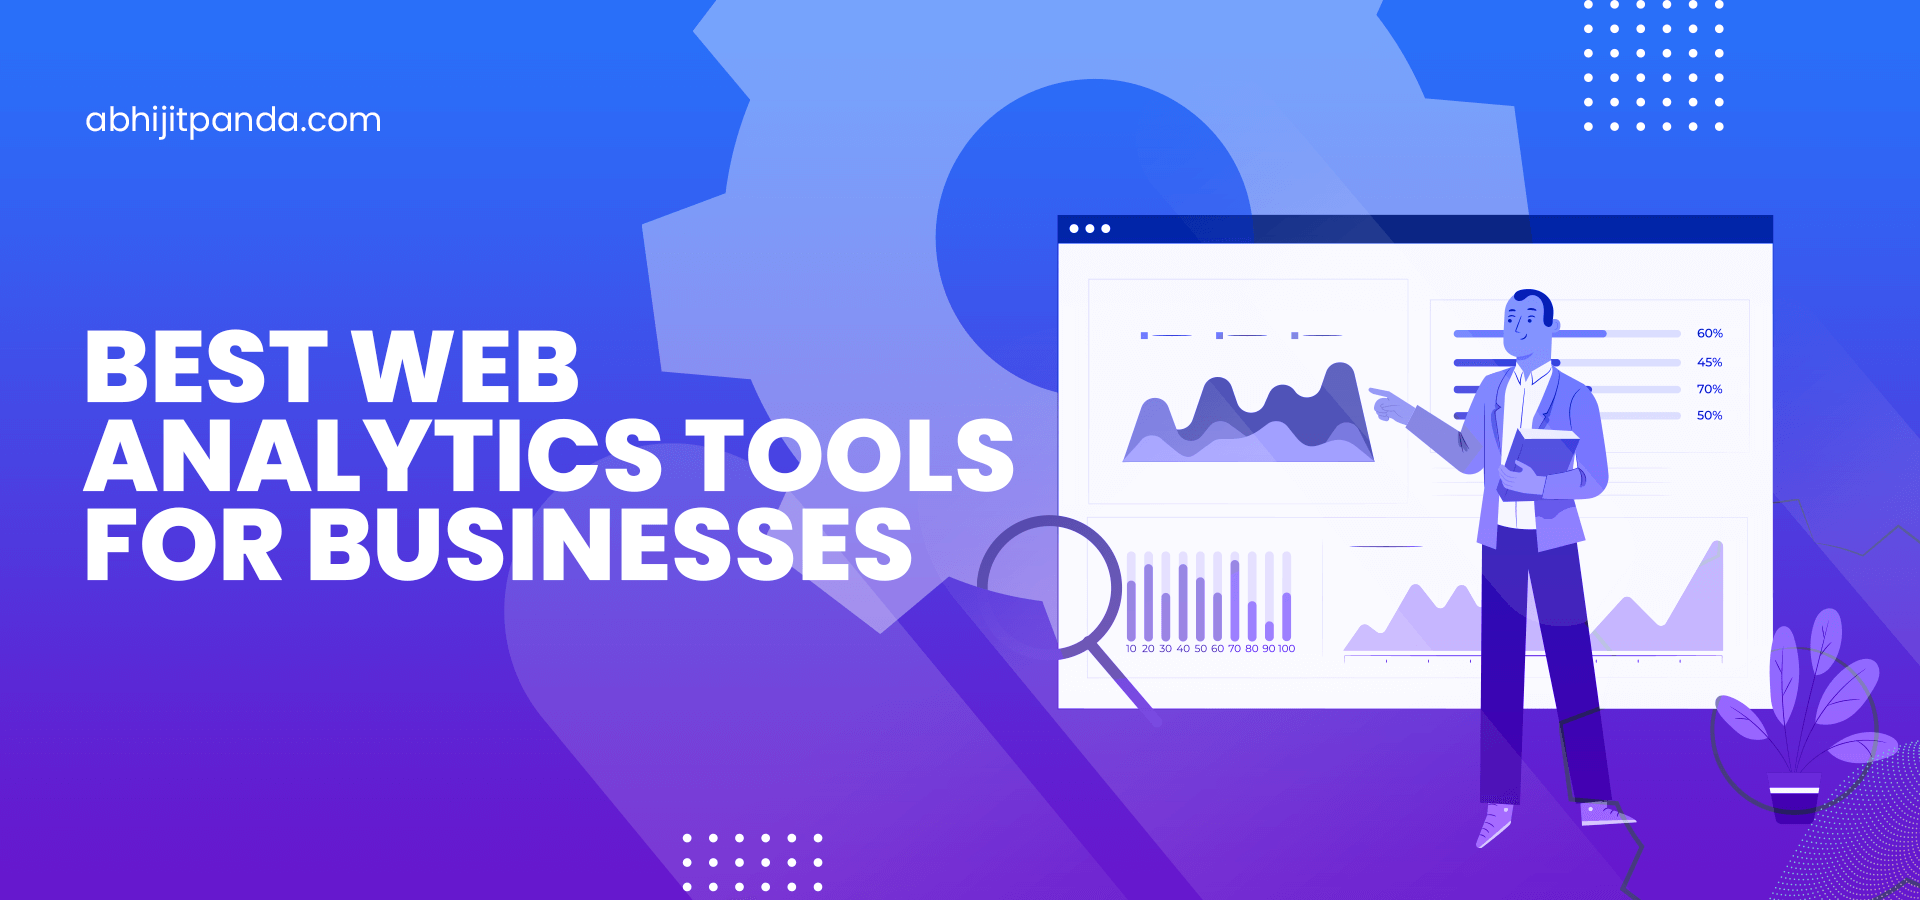 Web Analytics Tools for Businesses